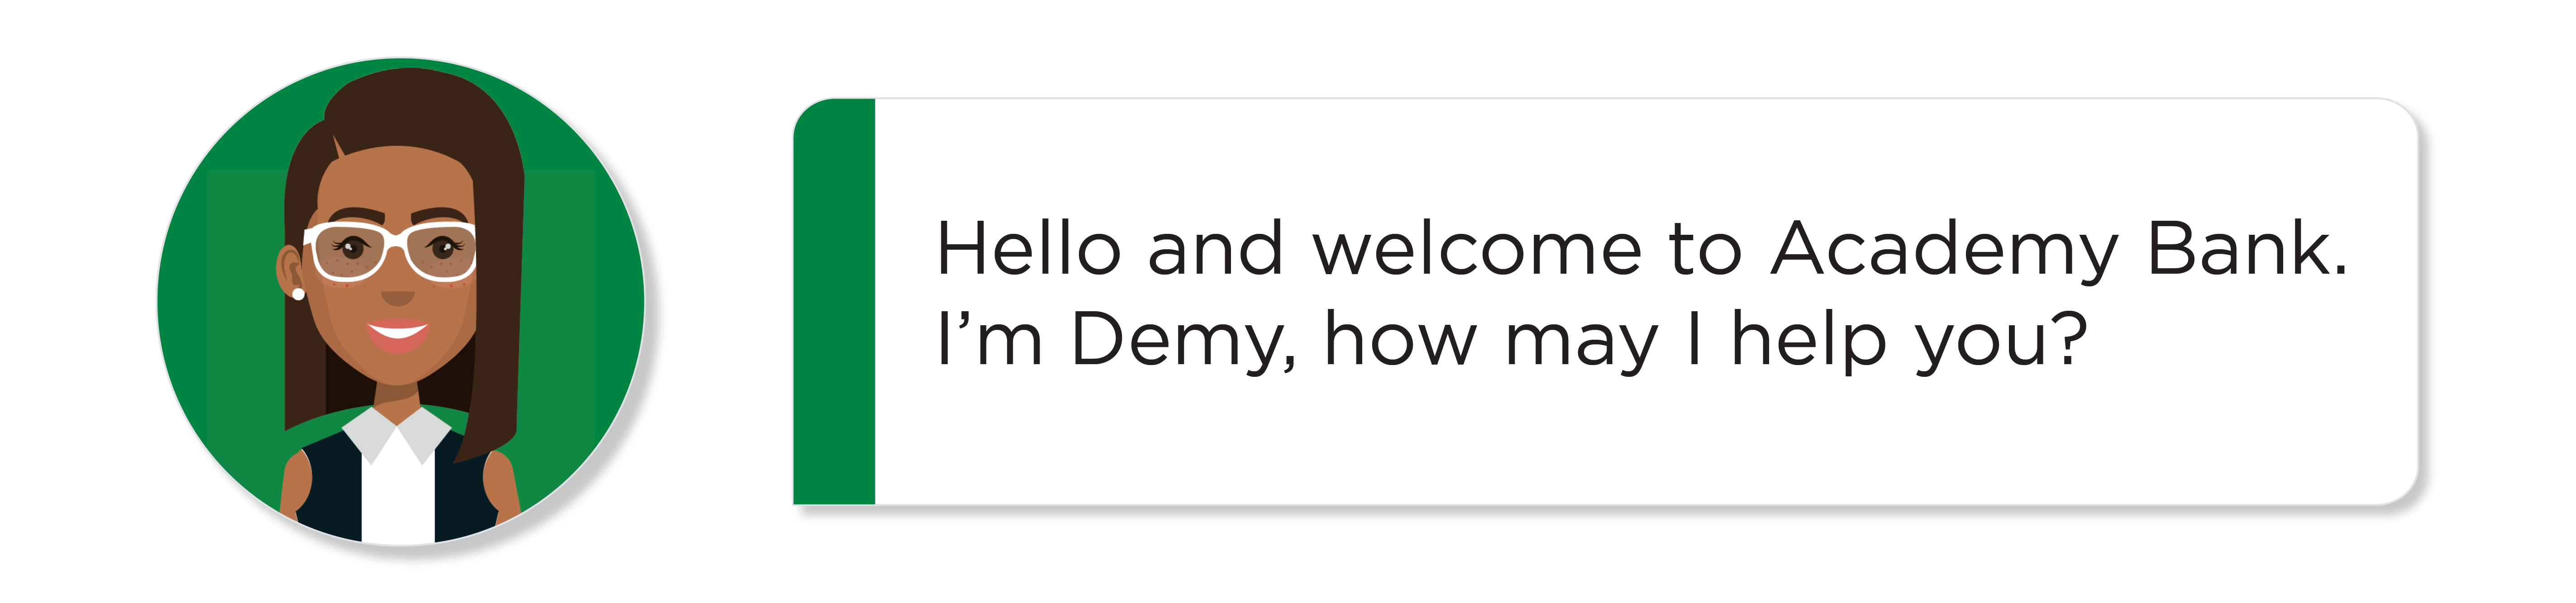 Academy Bank chat bot Demy says hello